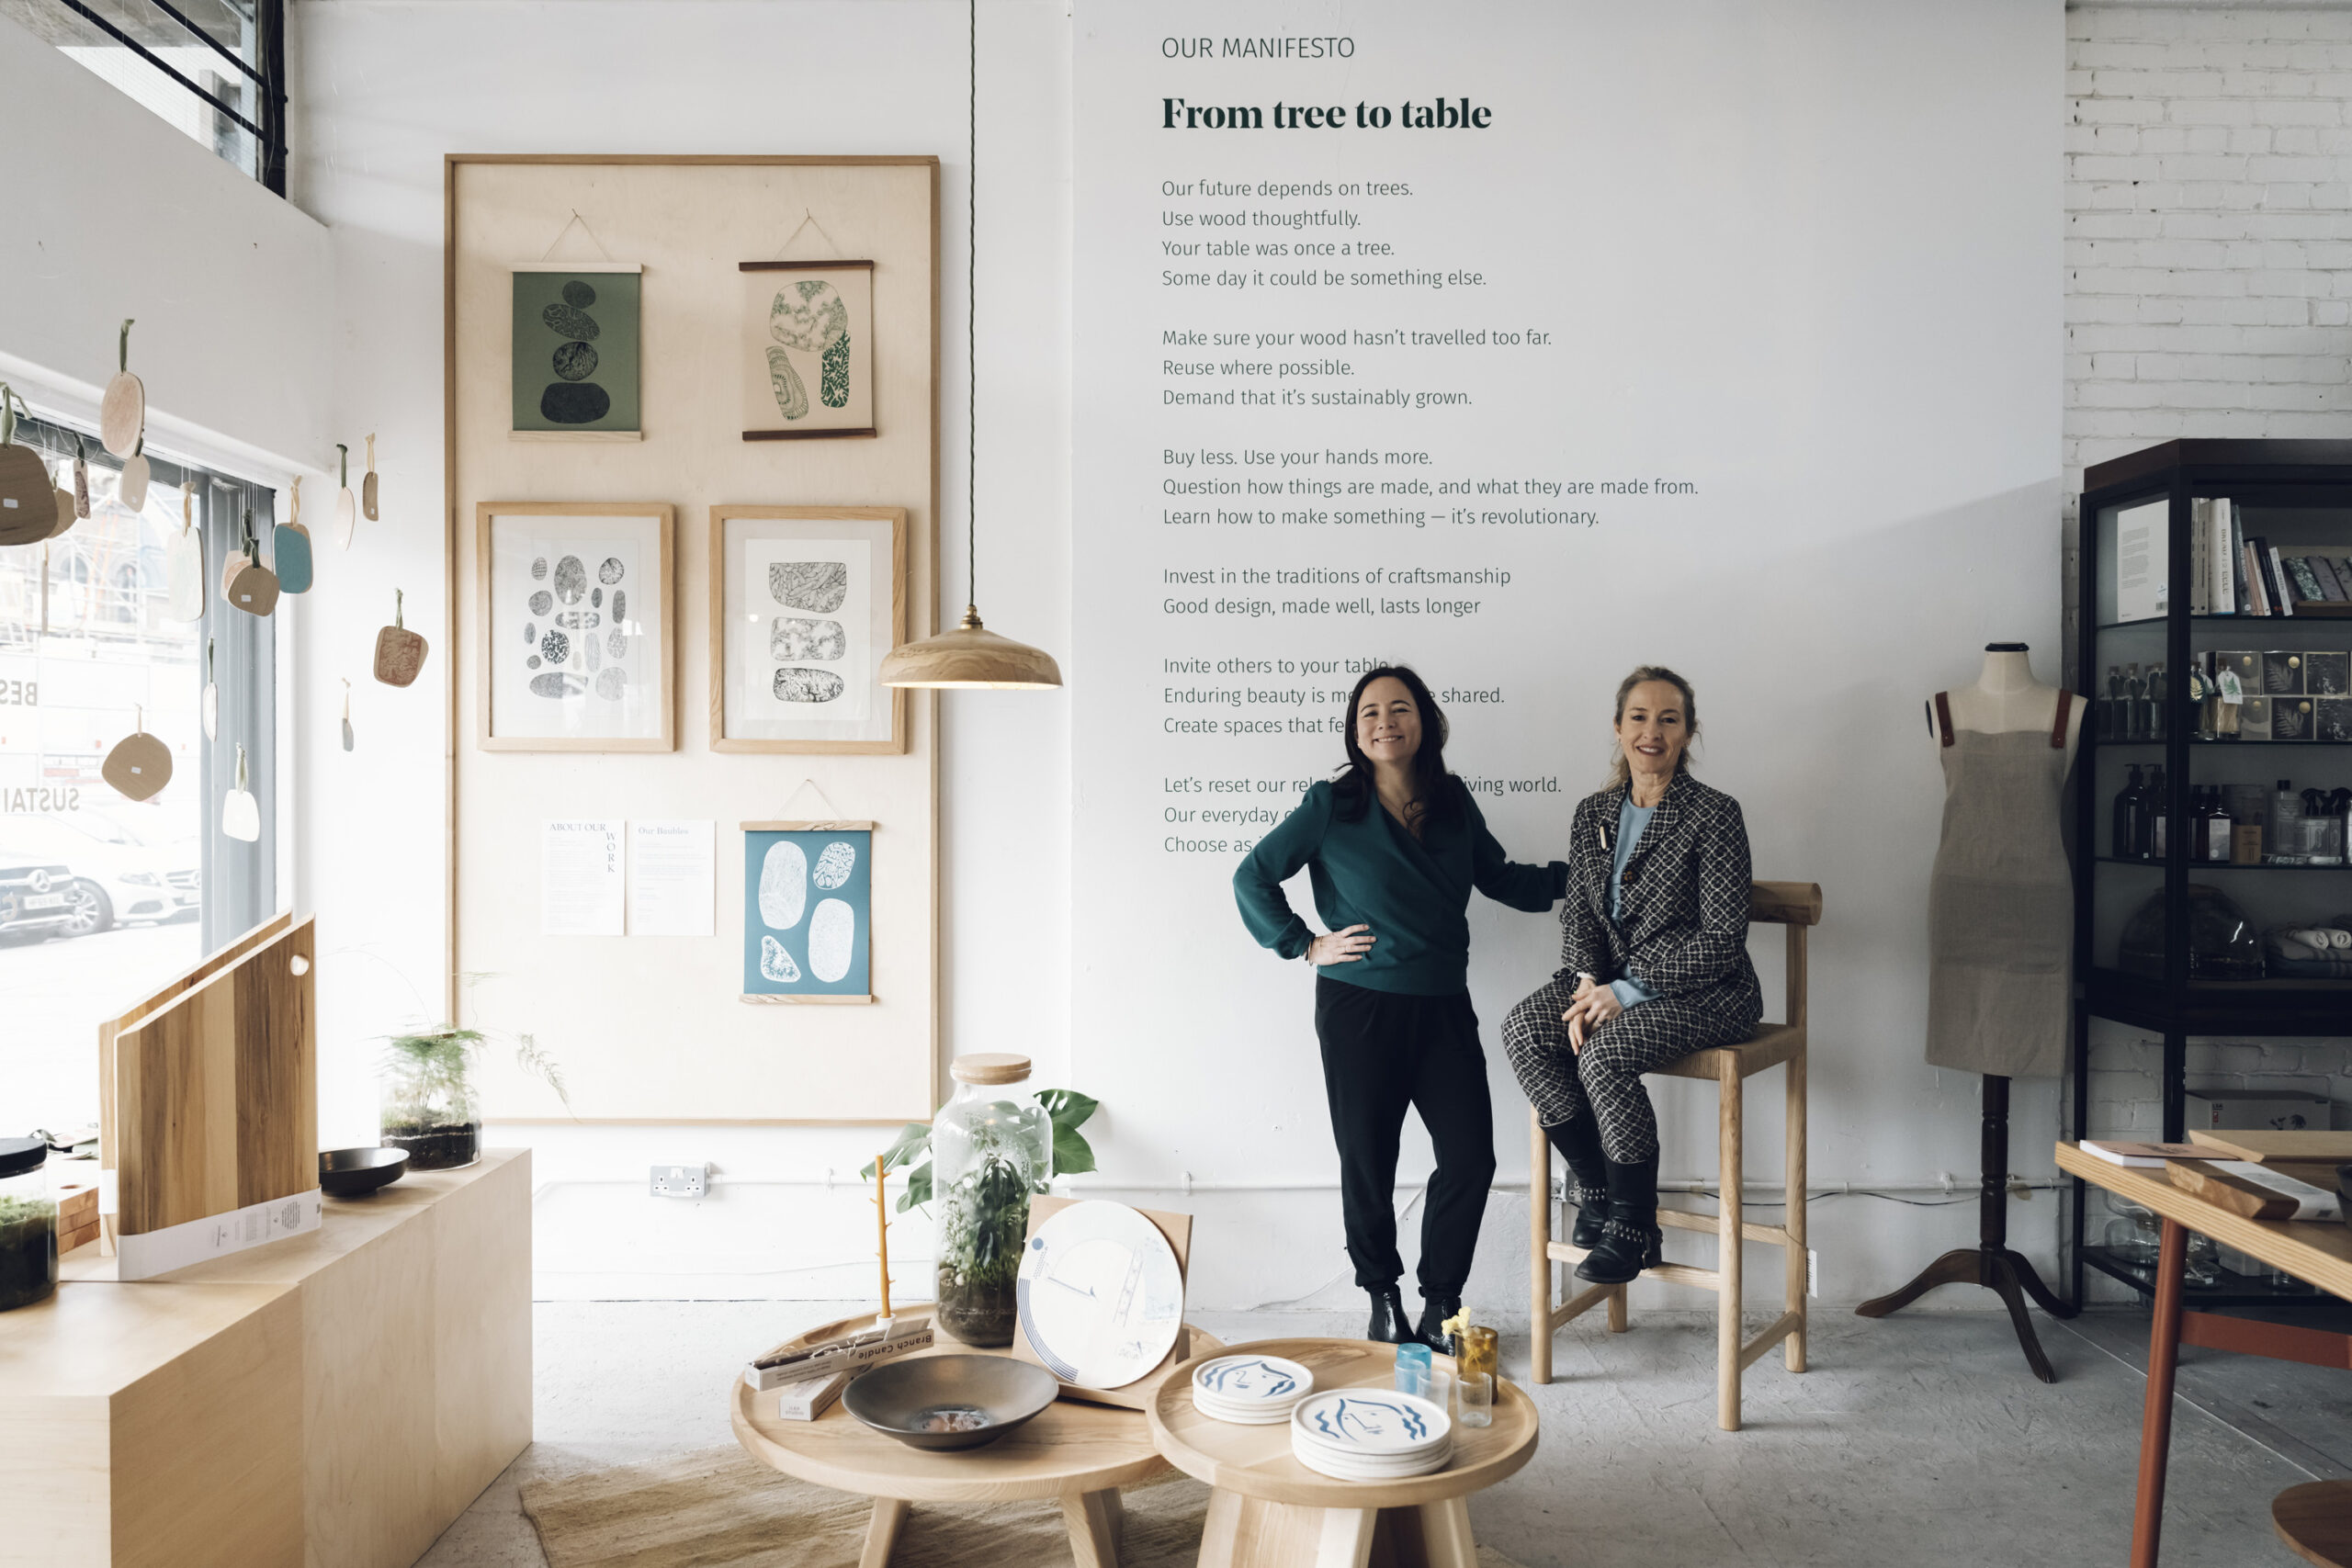 Two business owners in front of a manifesto in a design studio